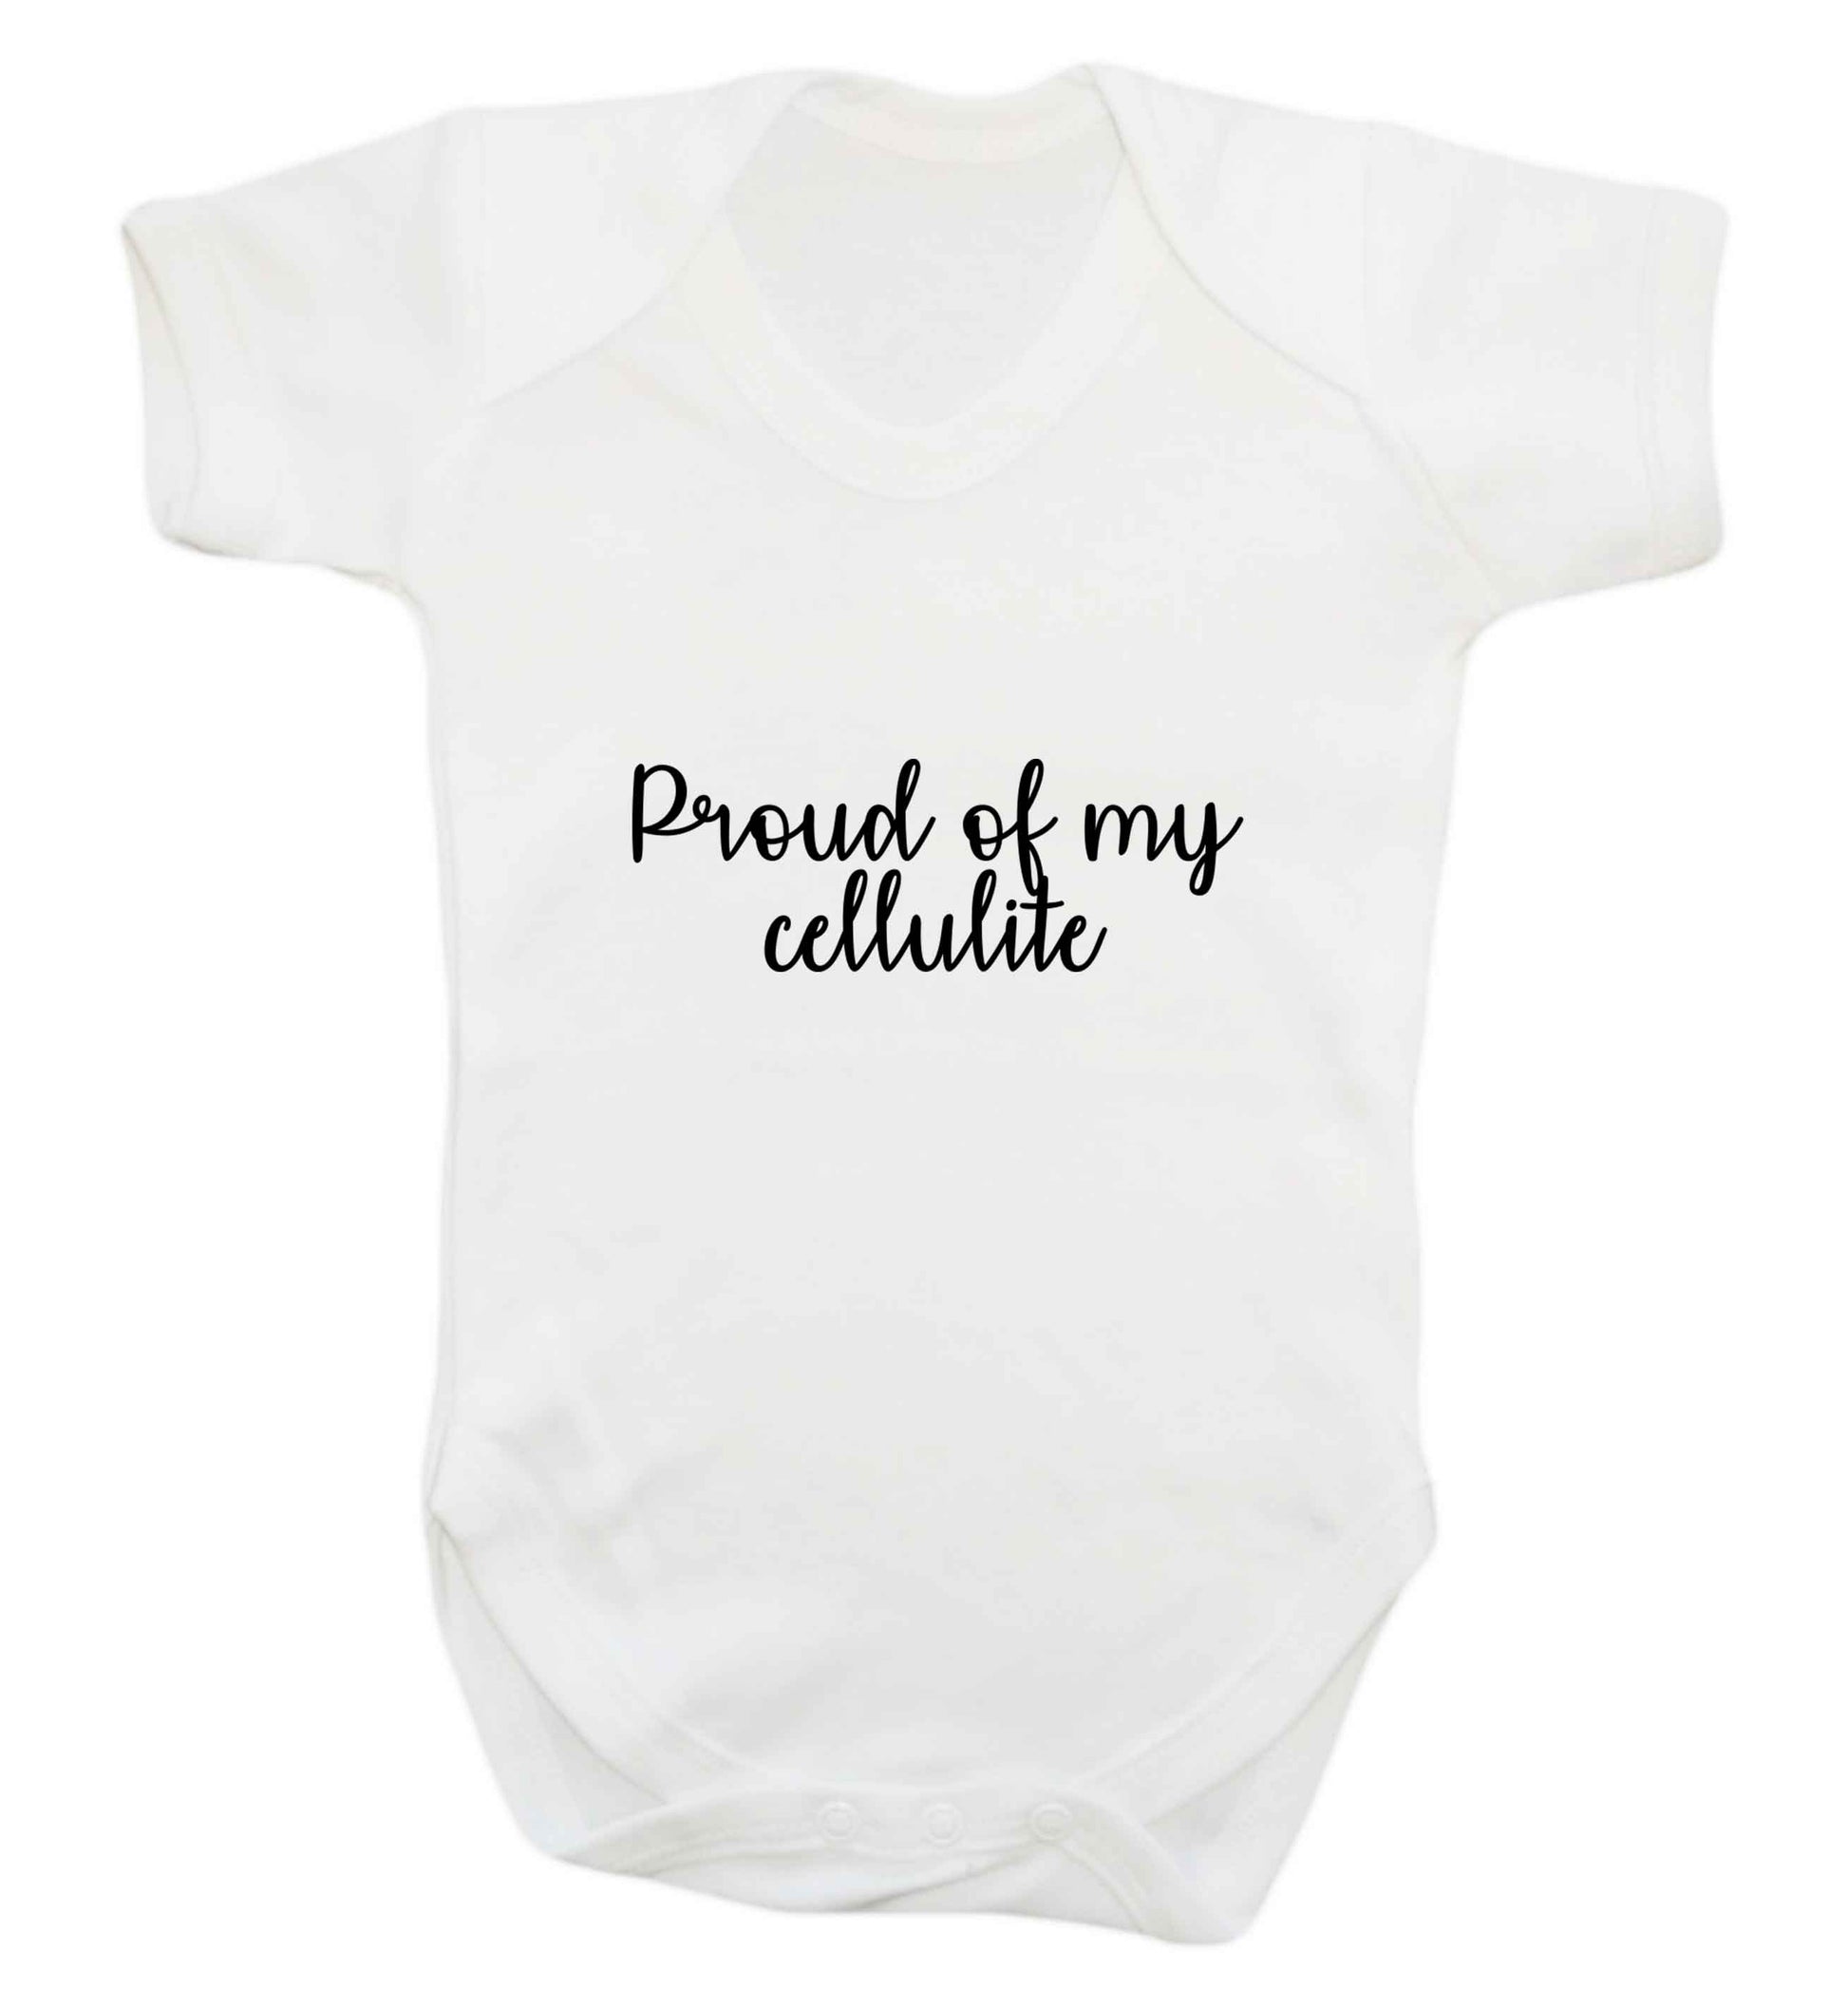 Proud of my cellulite baby vest white 18-24 months